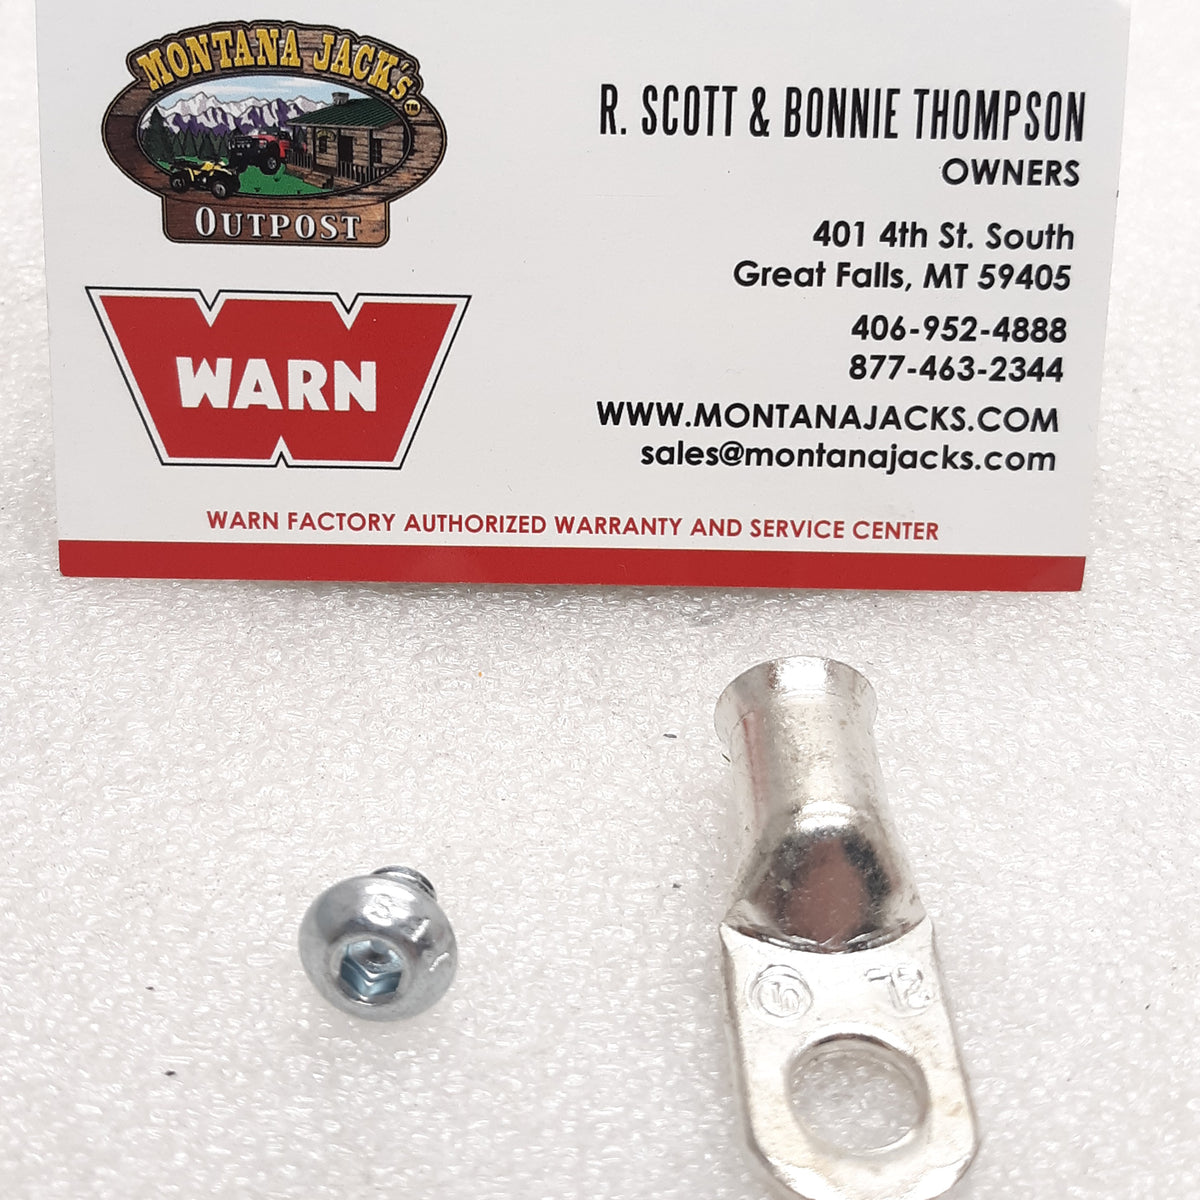 WARN 16463 Winch Cable Terminal Kit 5/16